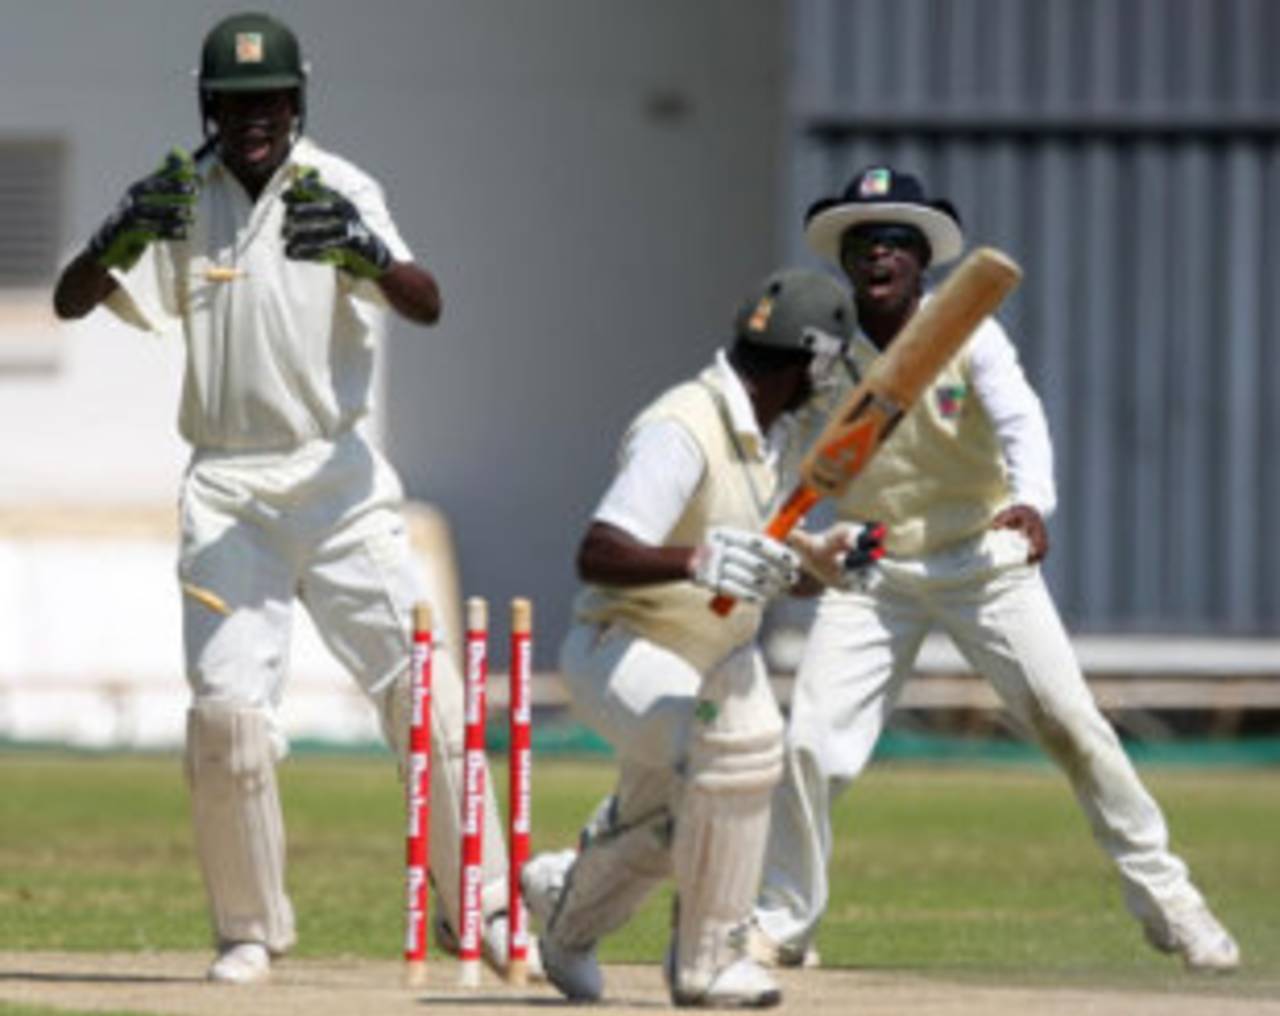 Taurai Madiri of Westerns is bowled by Natsai Mushangwe, Easterns v Westerns, Logan Cup, Harare Sports Club, April 24, 2009